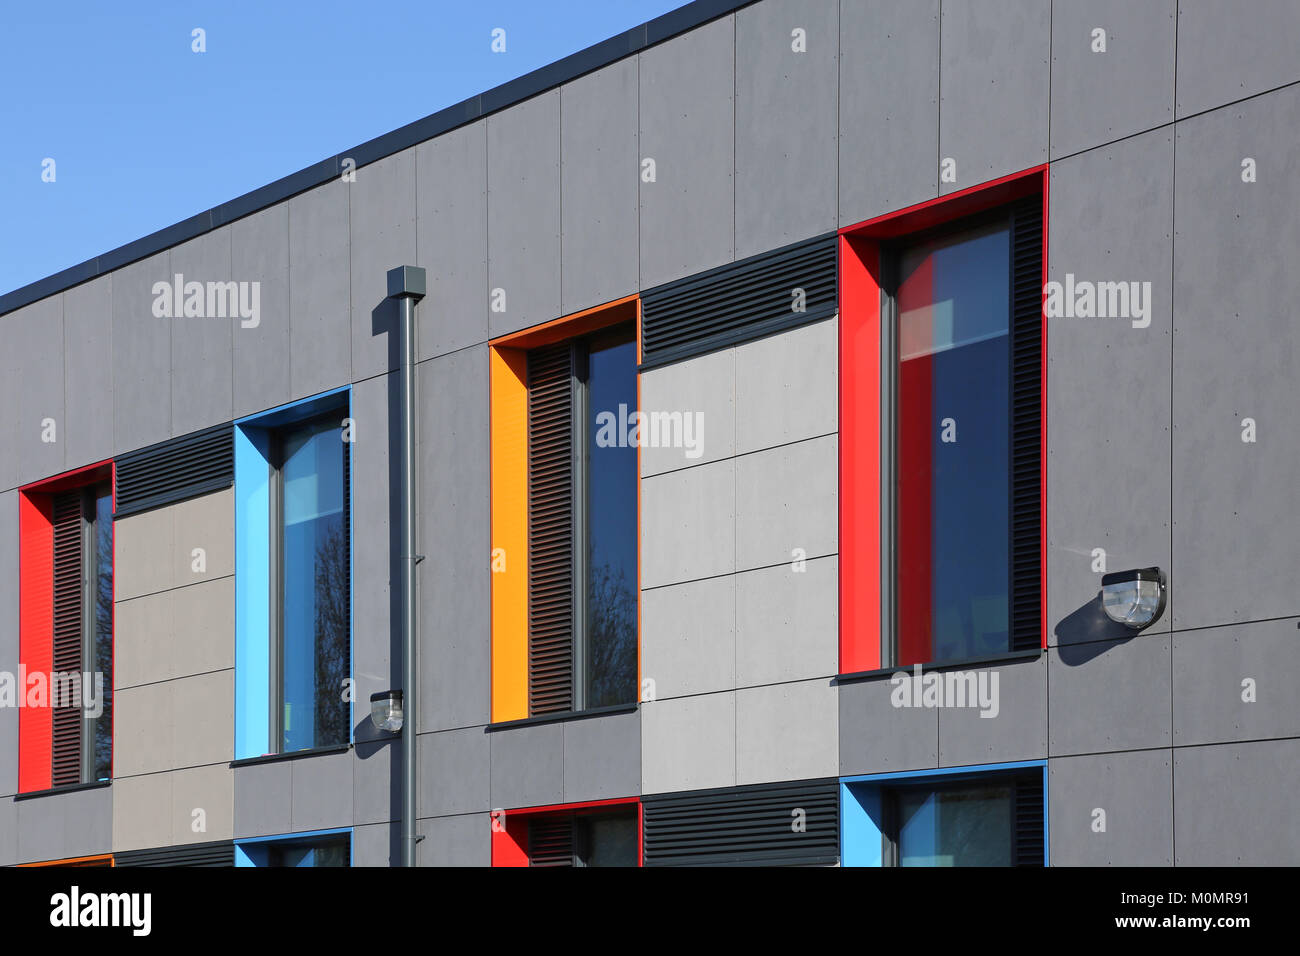 Cladding detail of a new London primary school showing brightly coloured window reveals and grey wall panels. Stock Photo